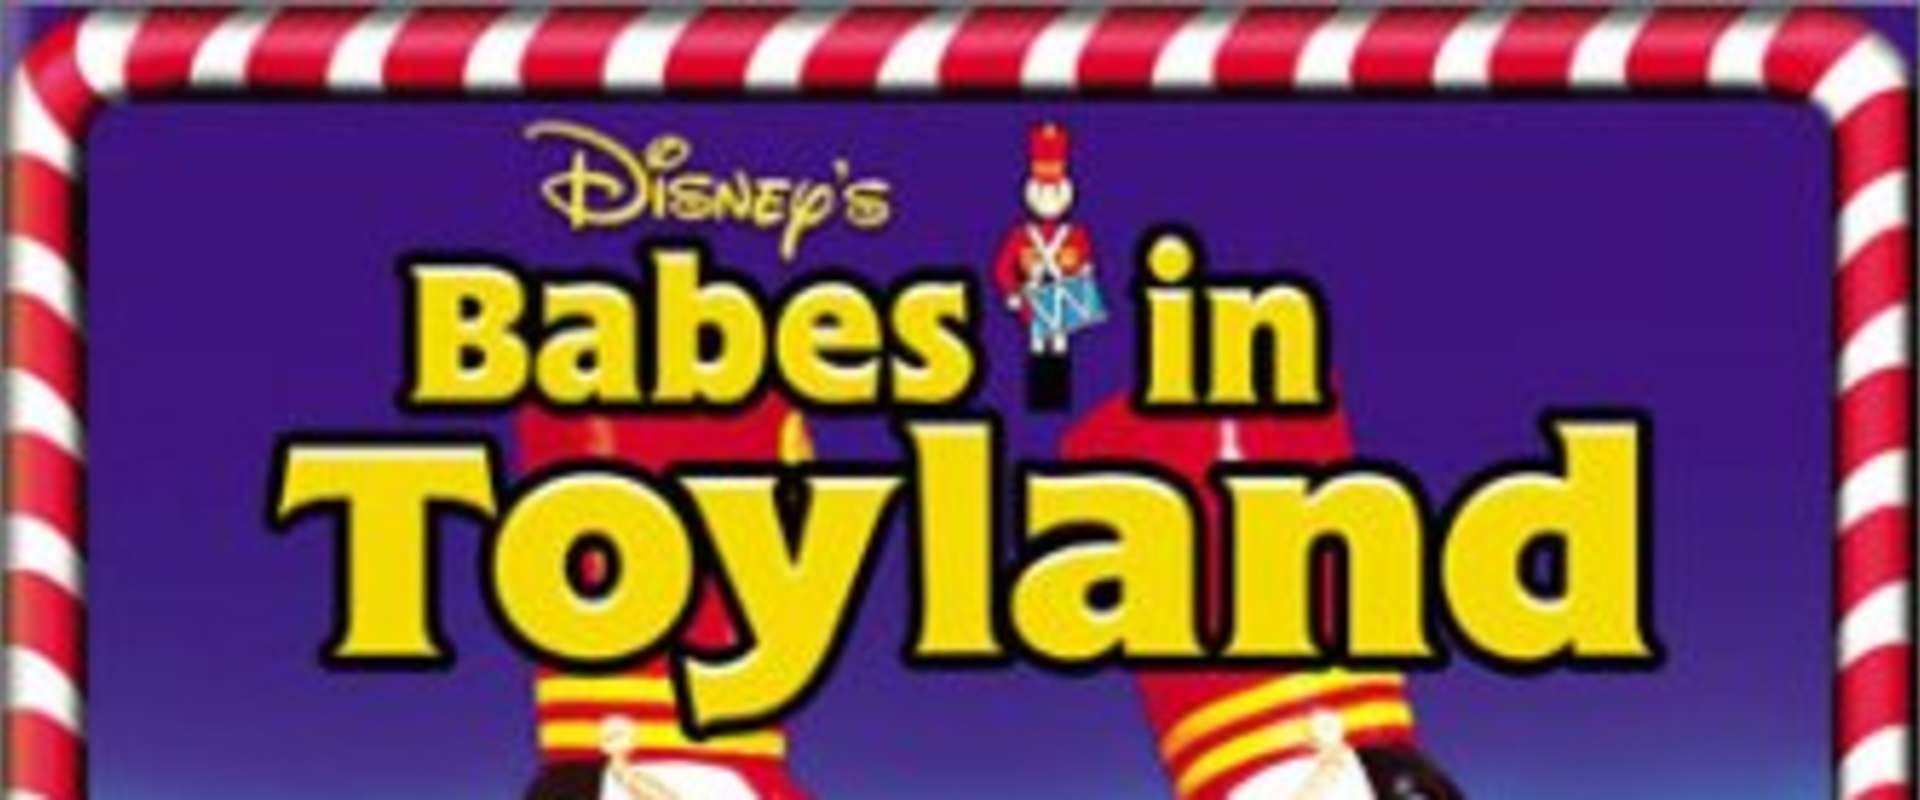 Babes in Toyland background 2